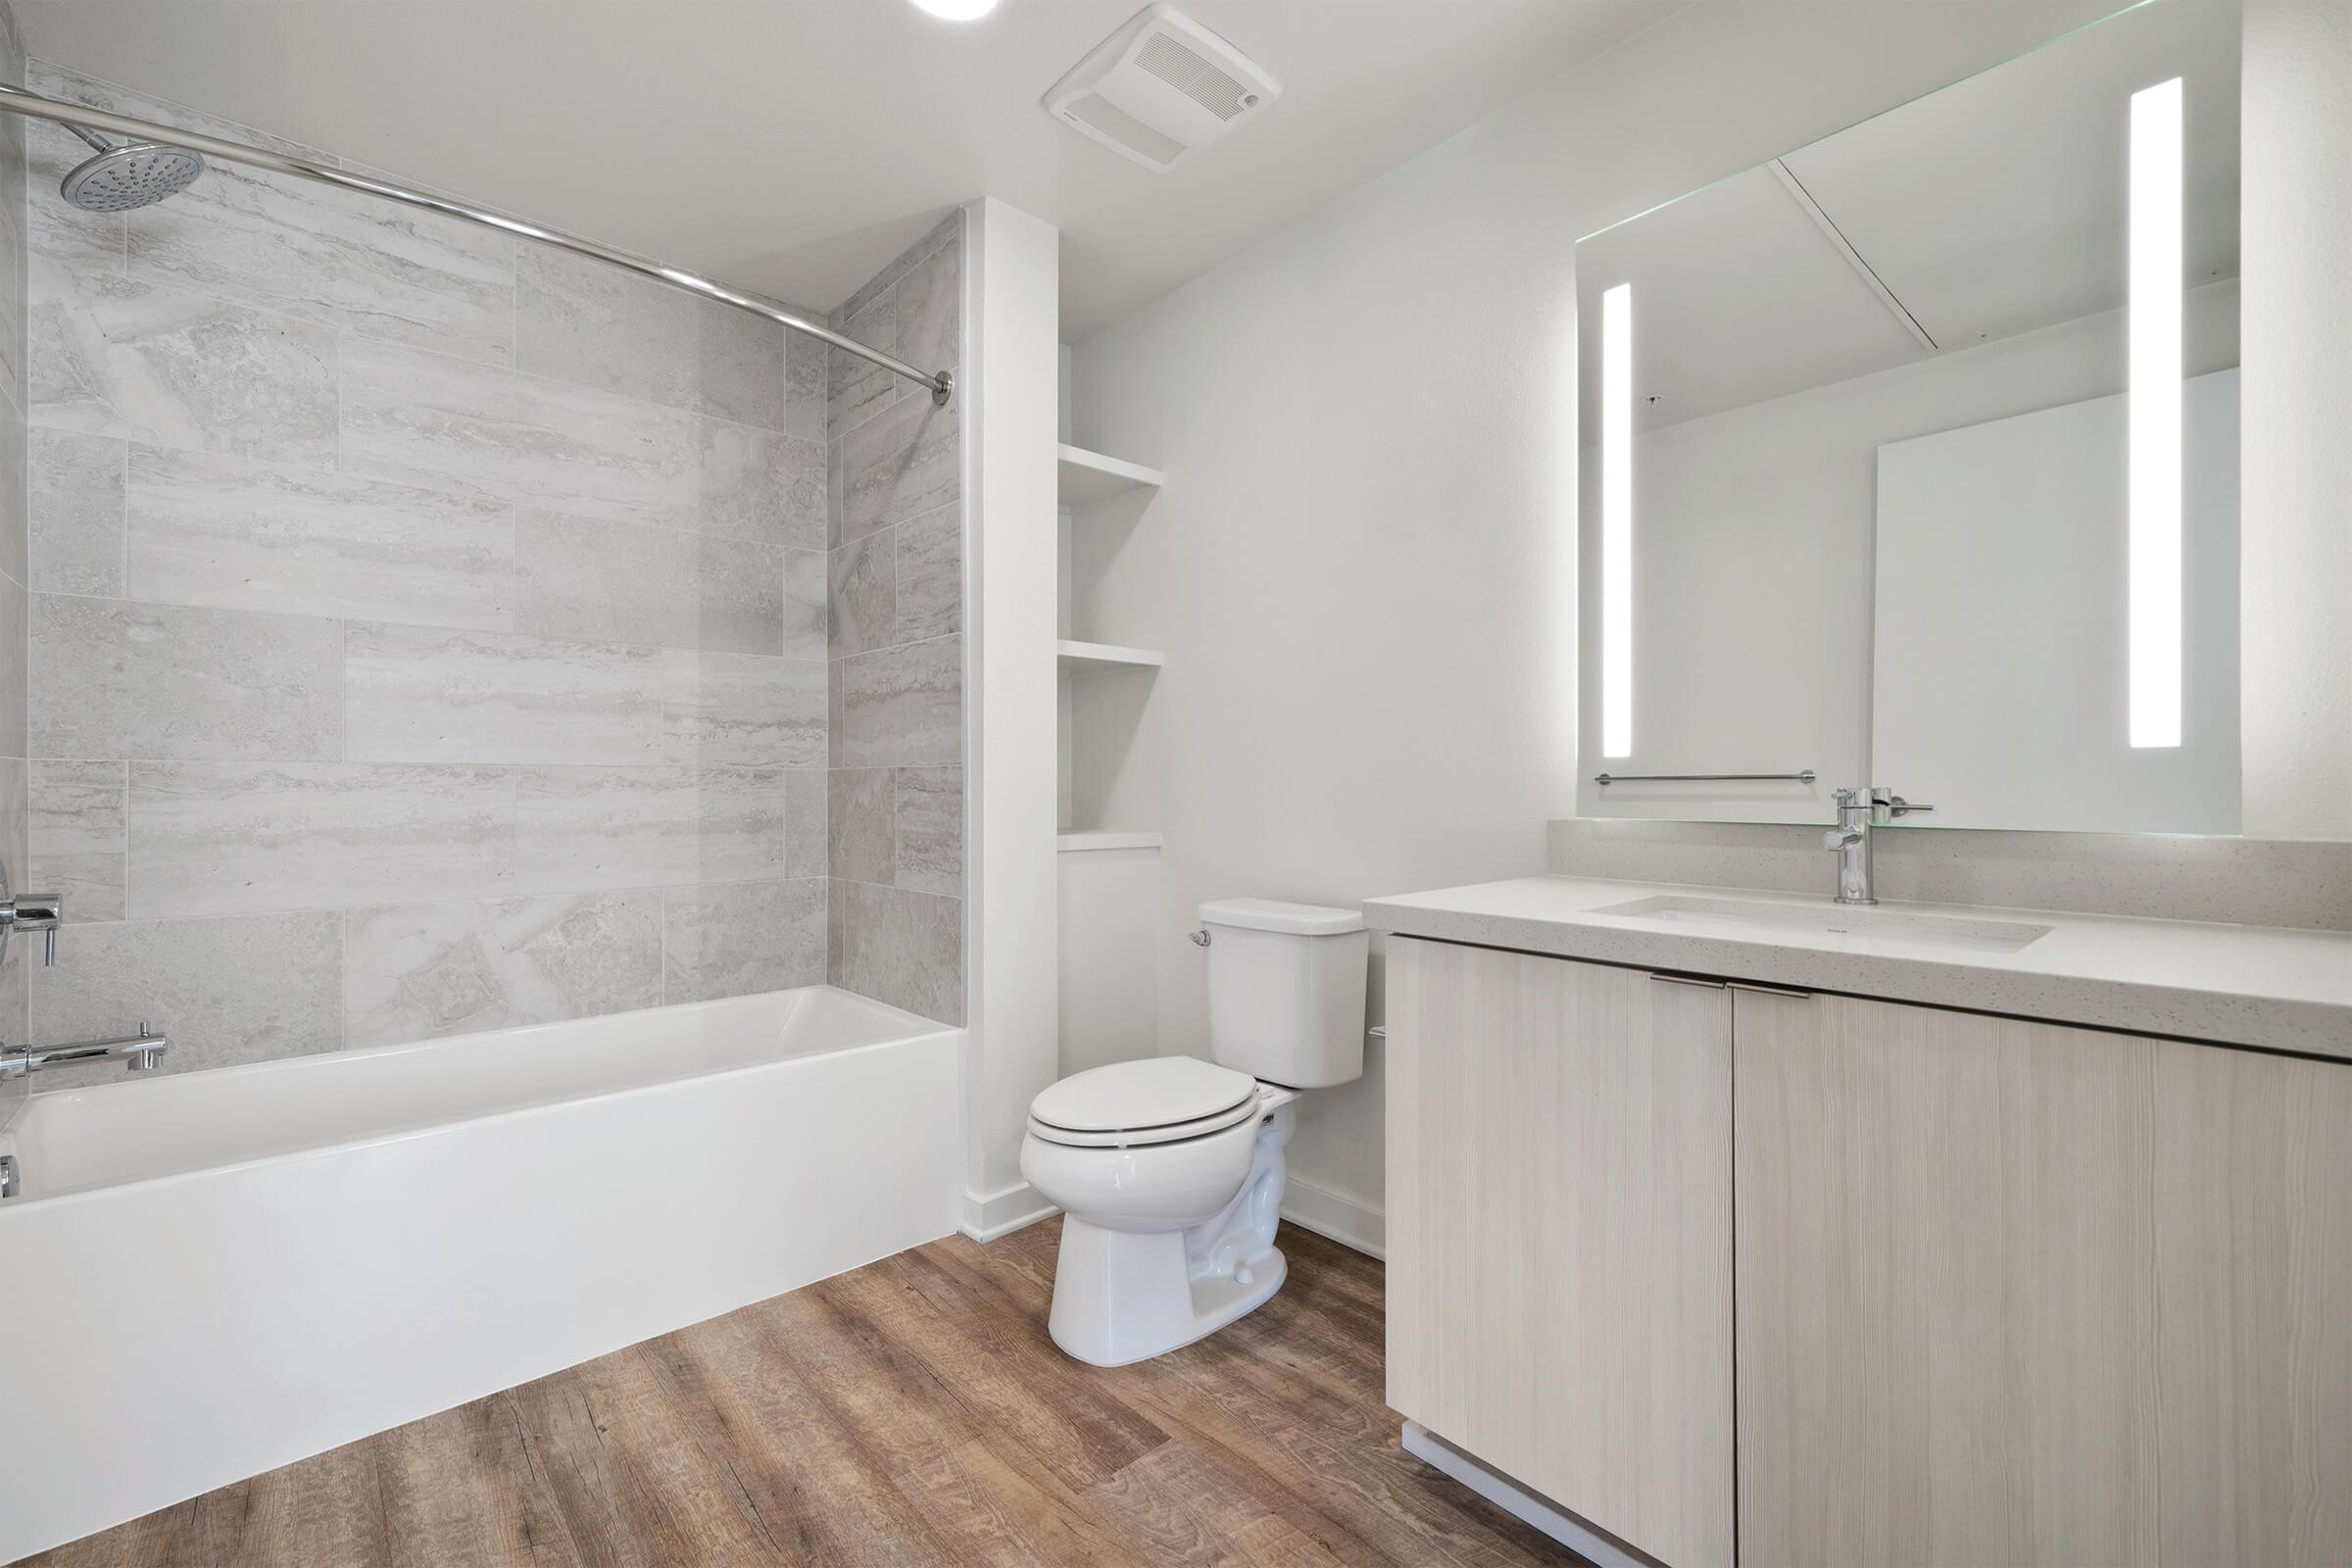 Prisma apartments offers bathrooms with mirrors and integrated lighting